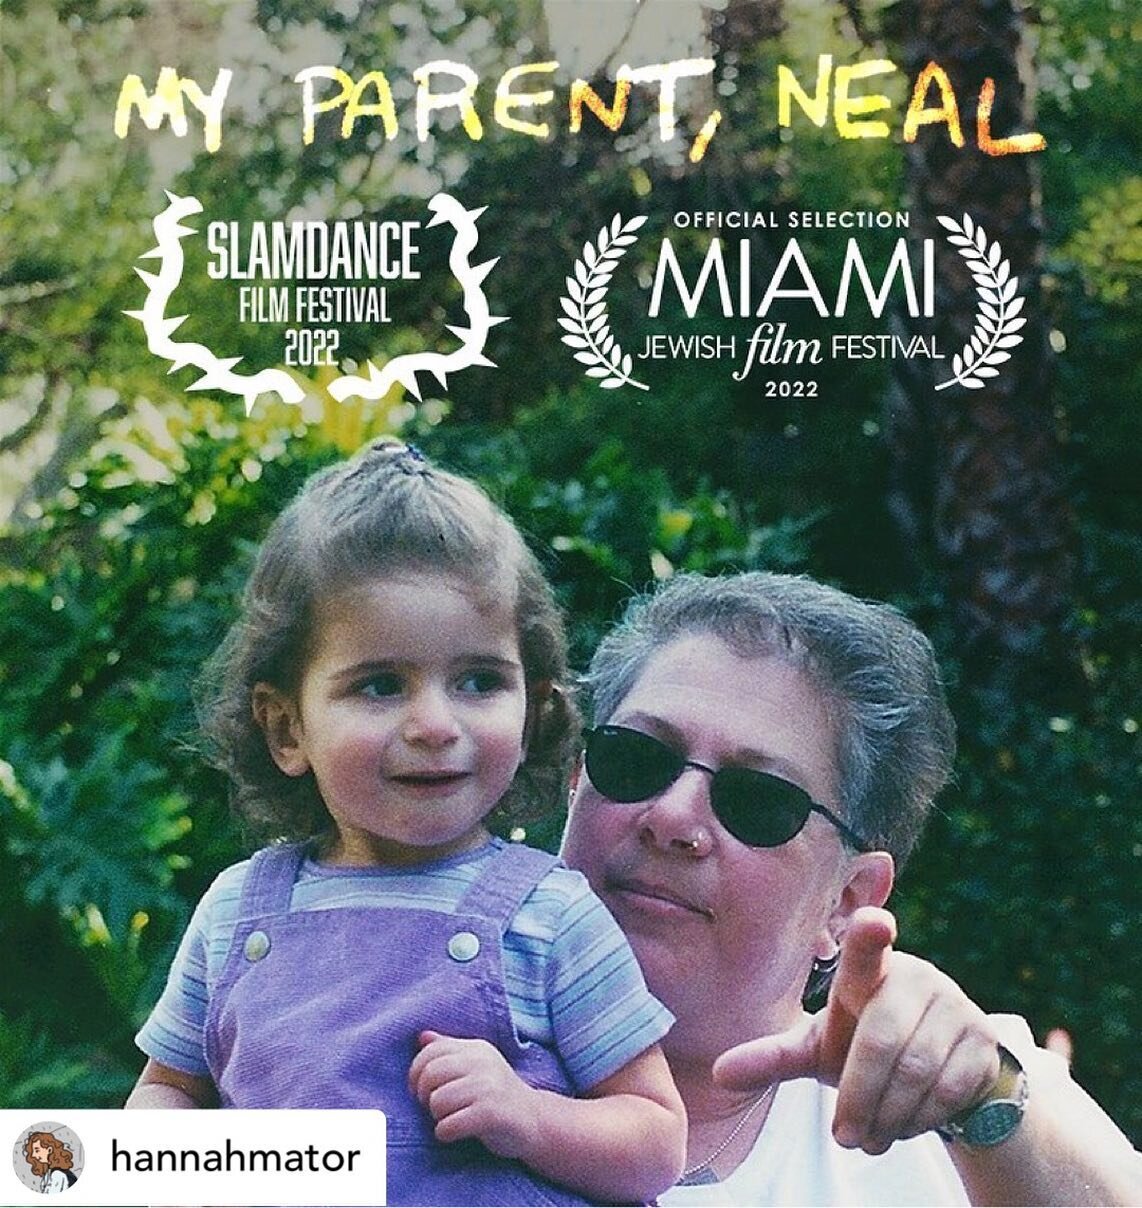 My half-sister @hannahmator &lsquo;s wonderful documentary short film My Parent, Neal is going to San Diego (@sdundergroundarts), Park City (@slamogram), and Miami (@miamijff)! It was a great experience composing music for Hannah and her film. So exc